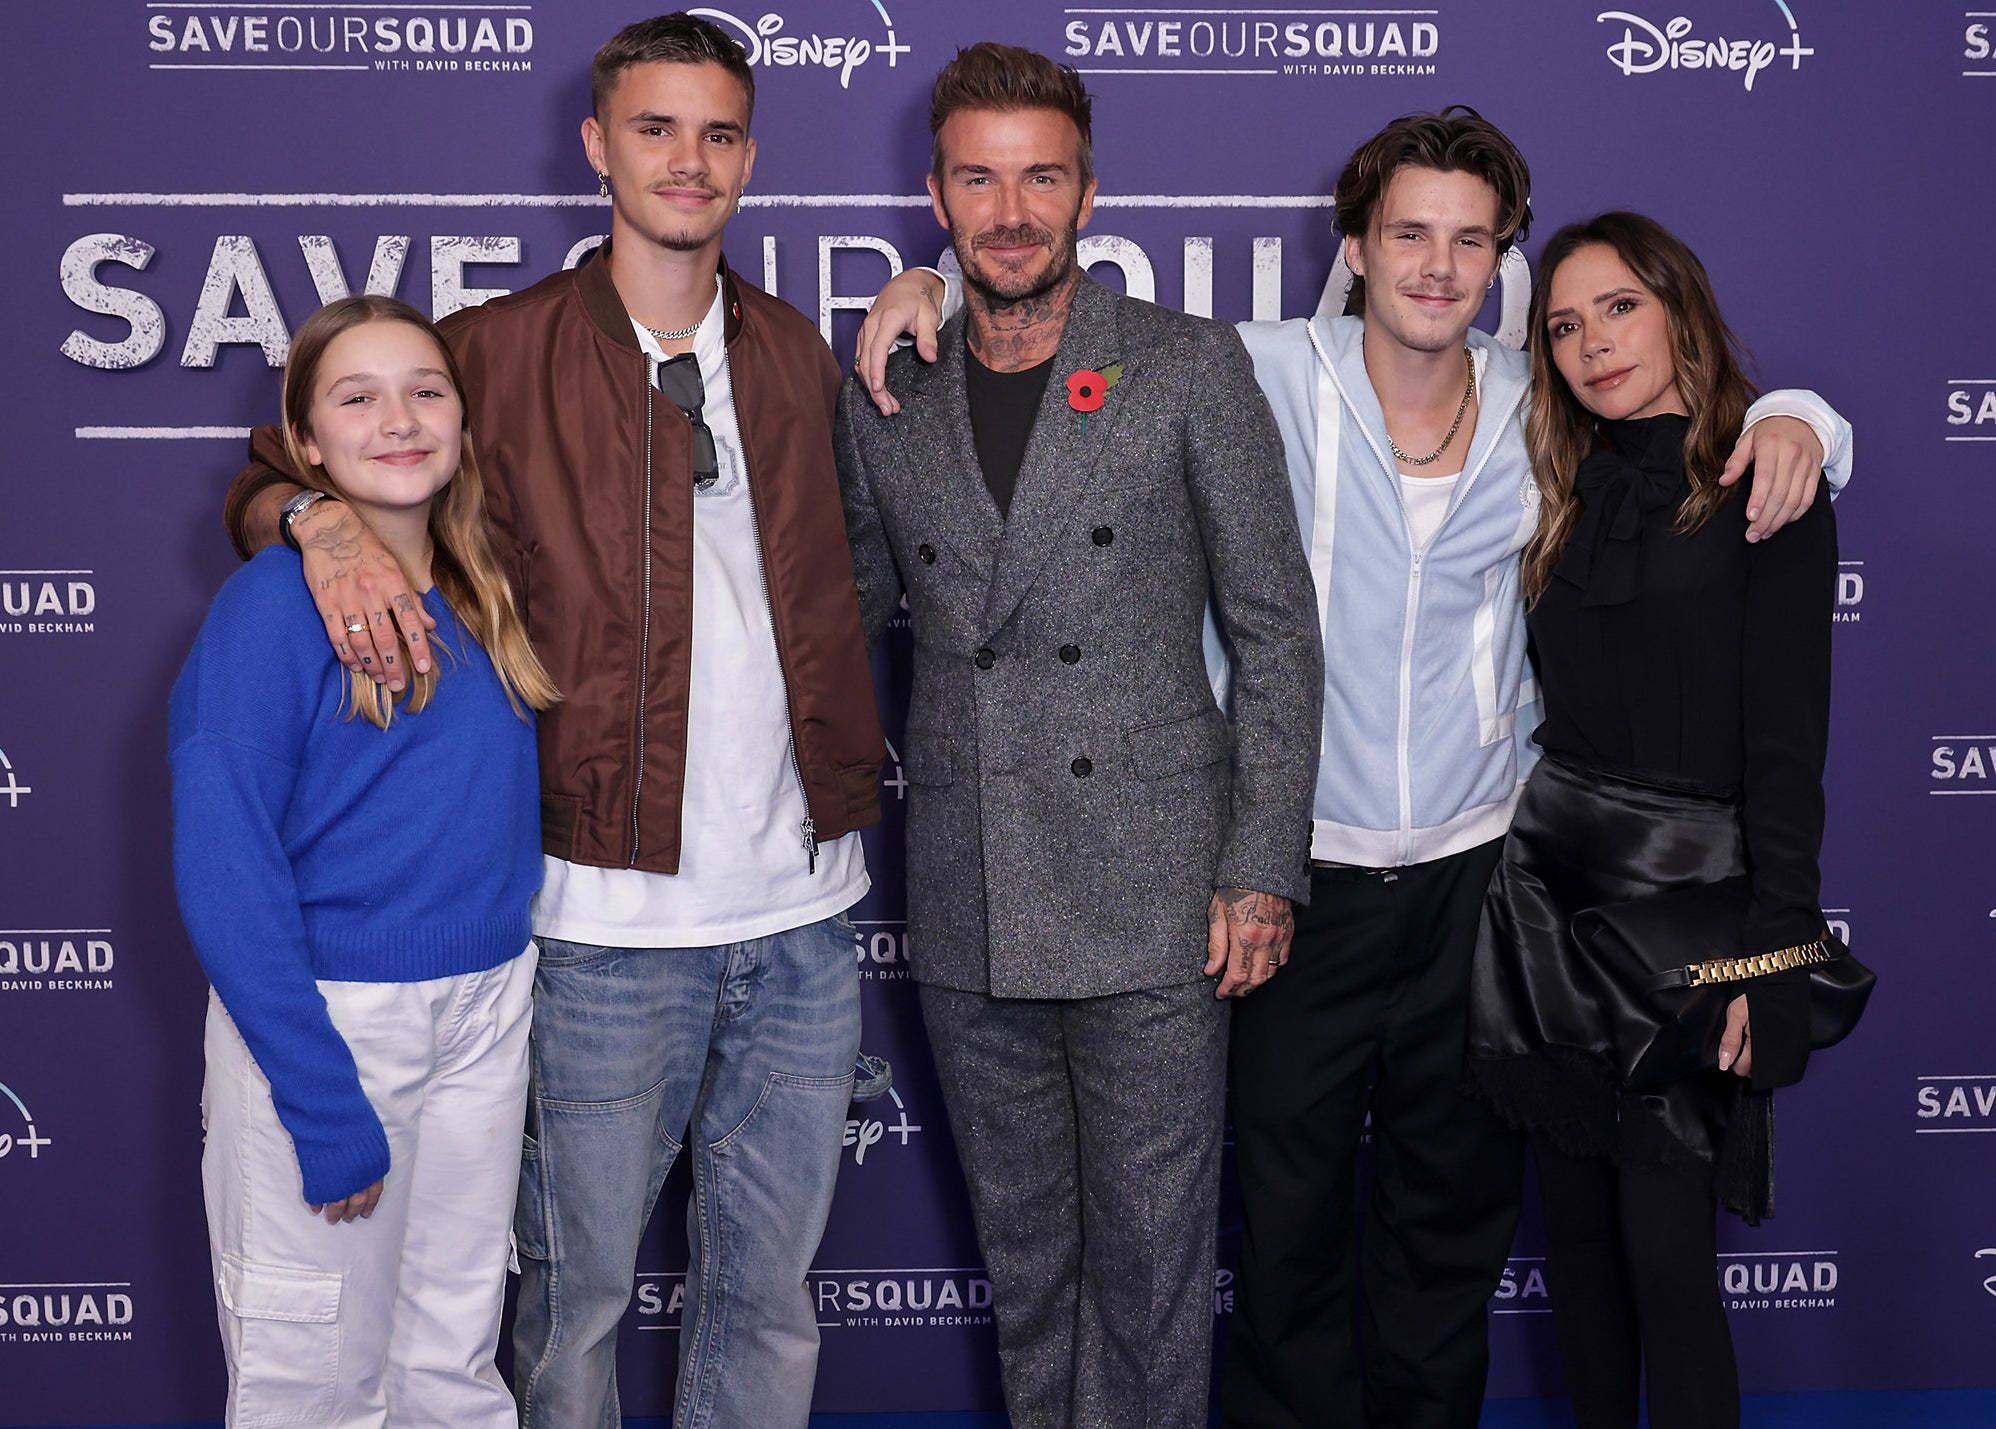 David and Victoria Beckham with their kids